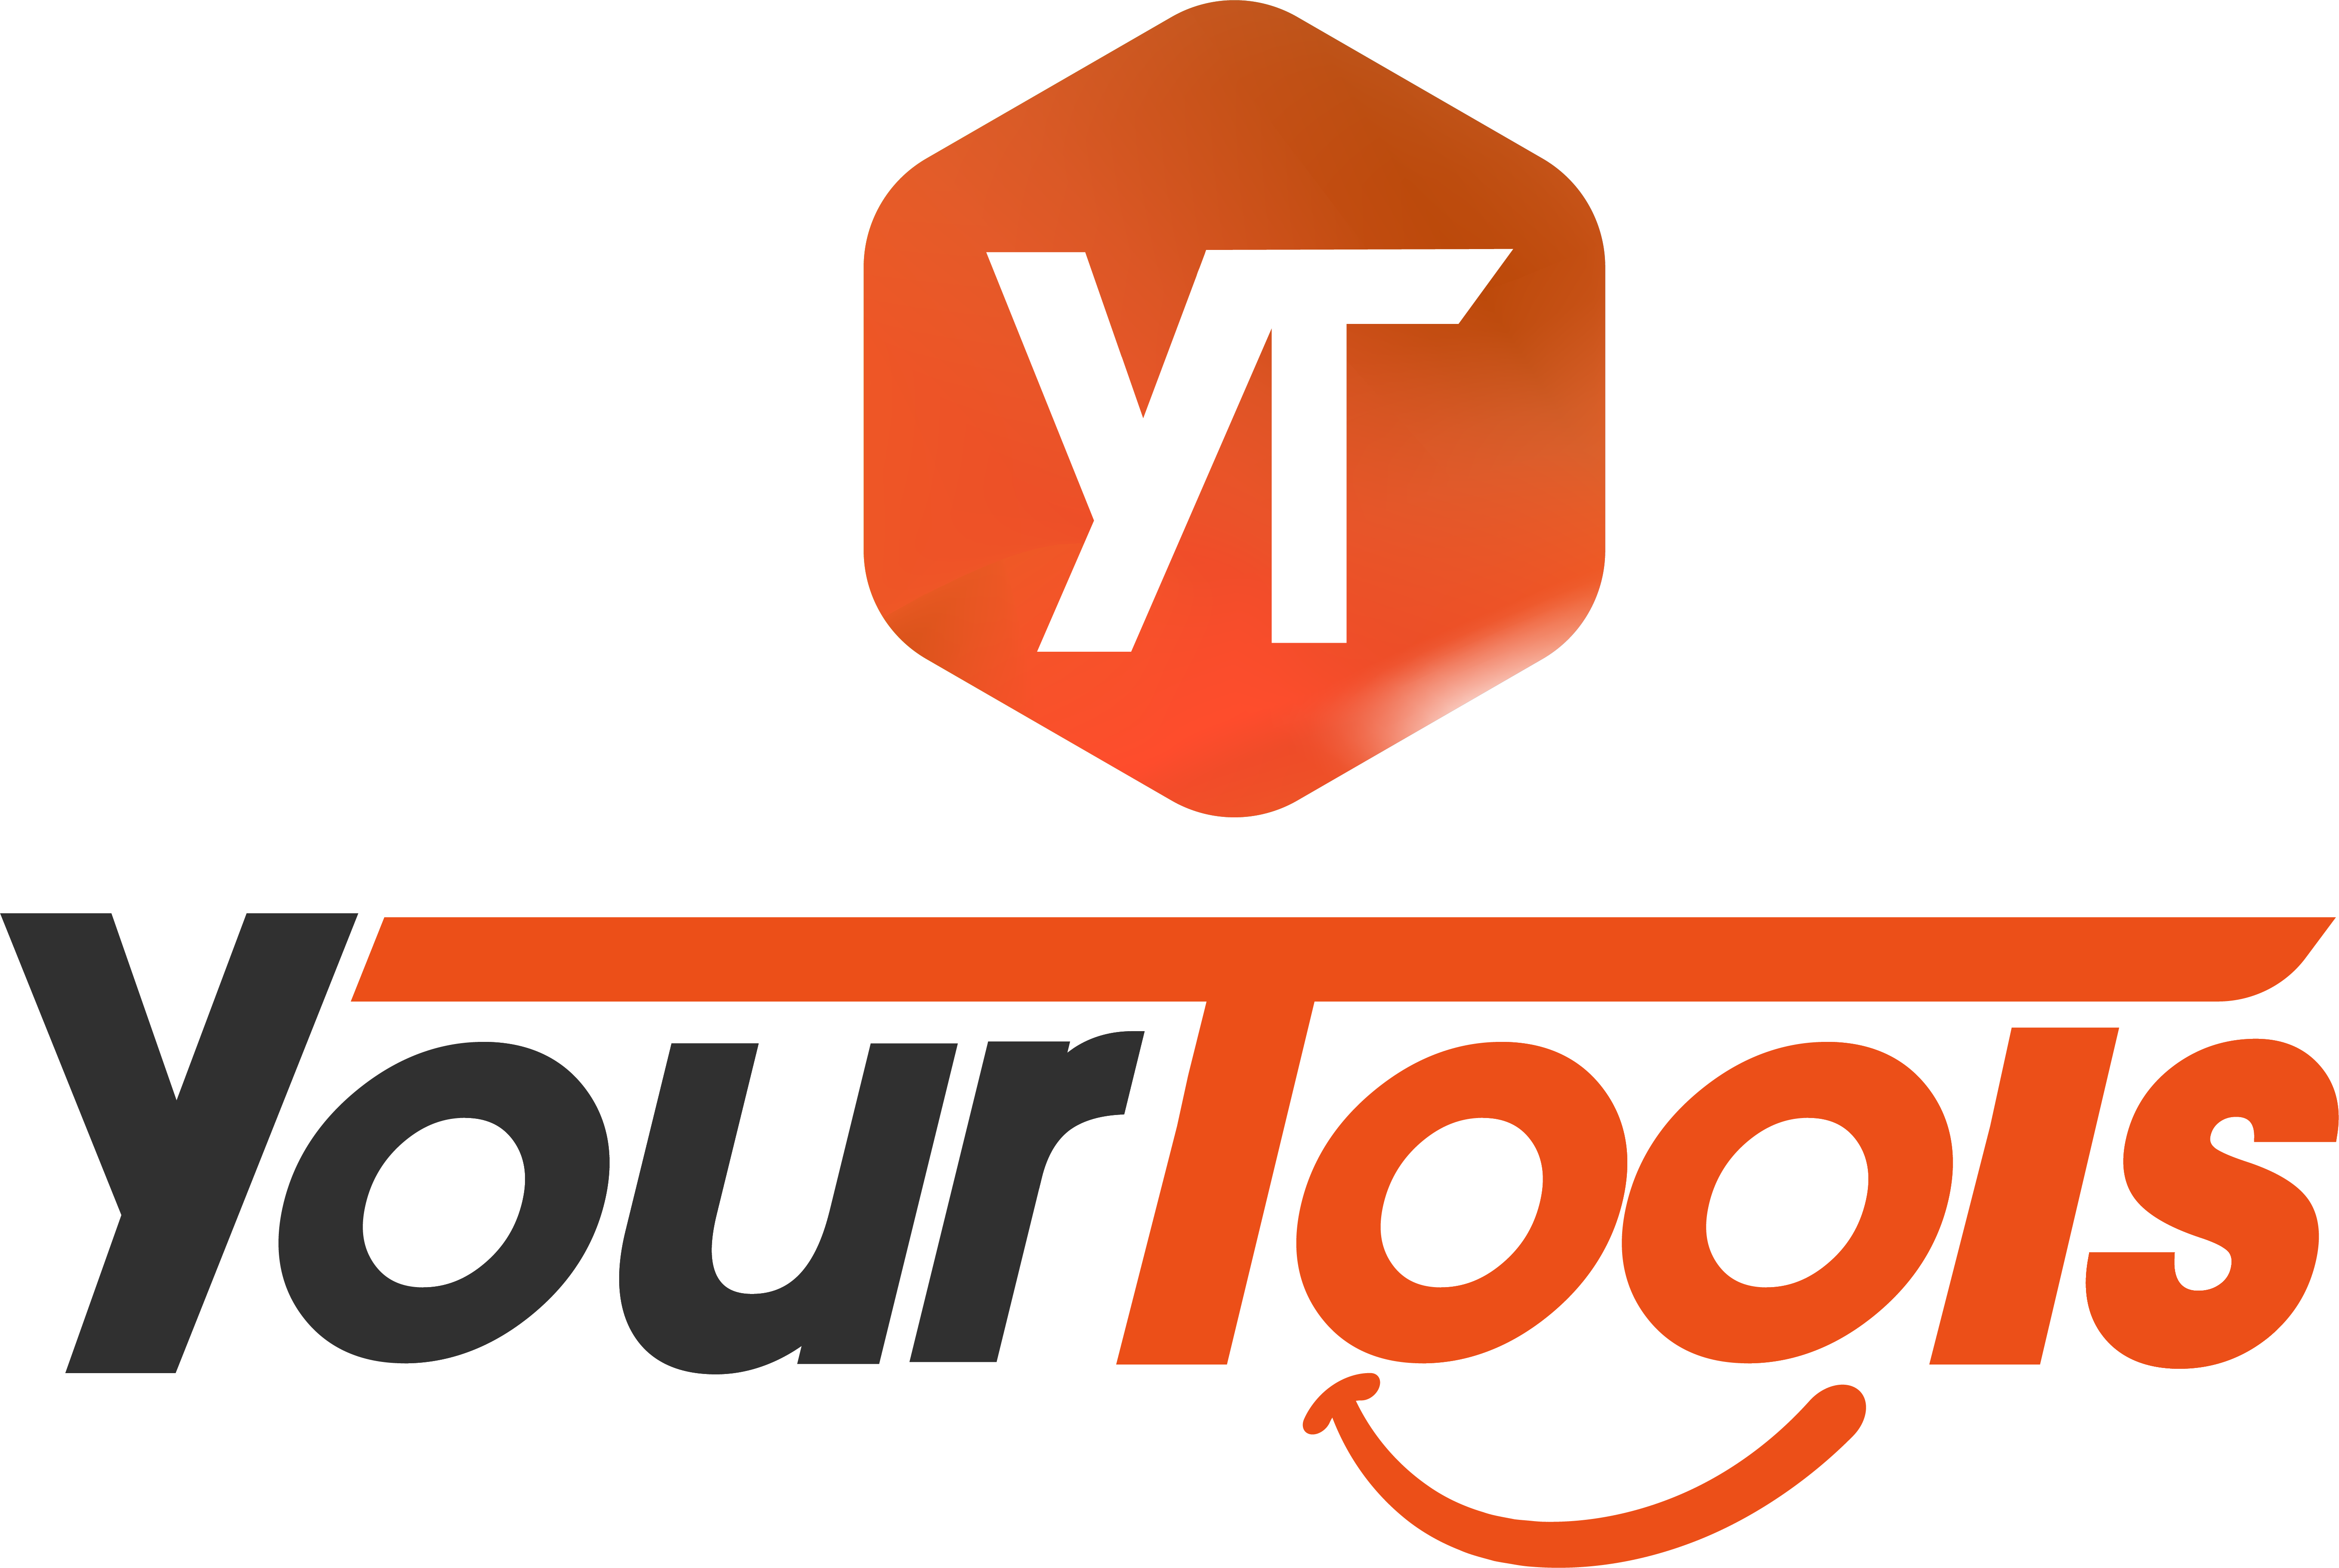 Yourtools - Cheapest Group Buy Service